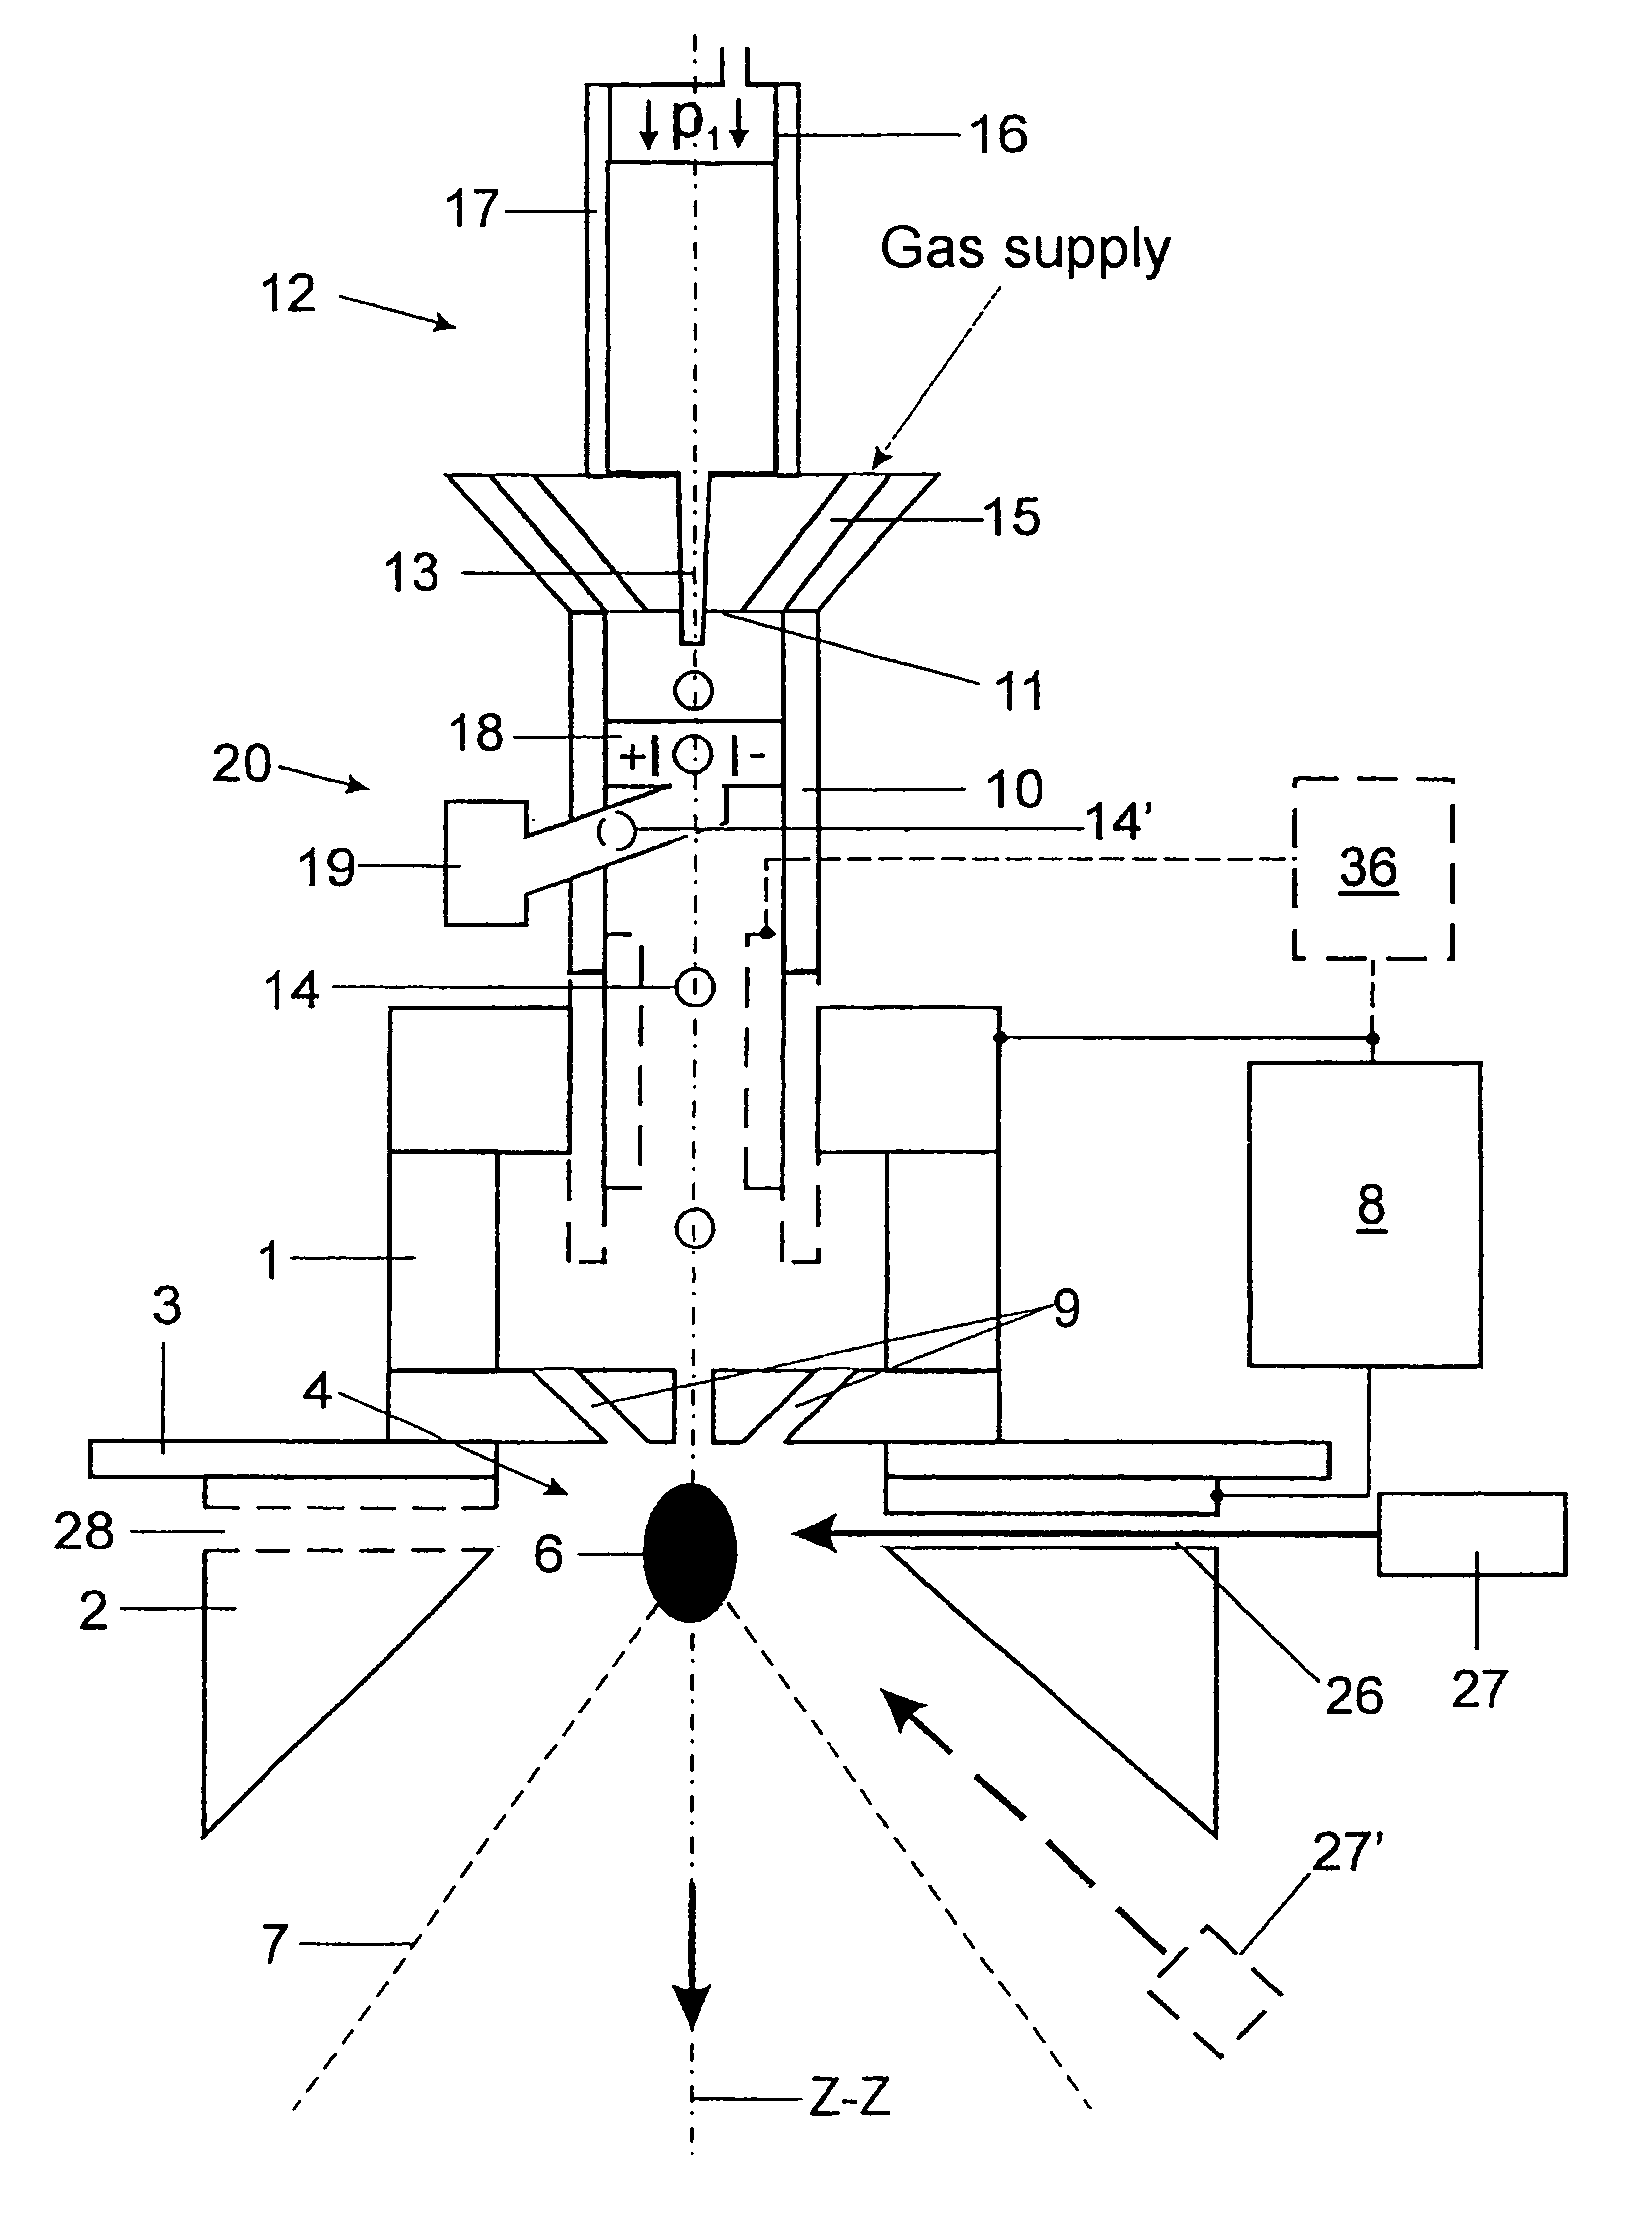 Device and method for generating extreme ultraviolet (EUV) radiation